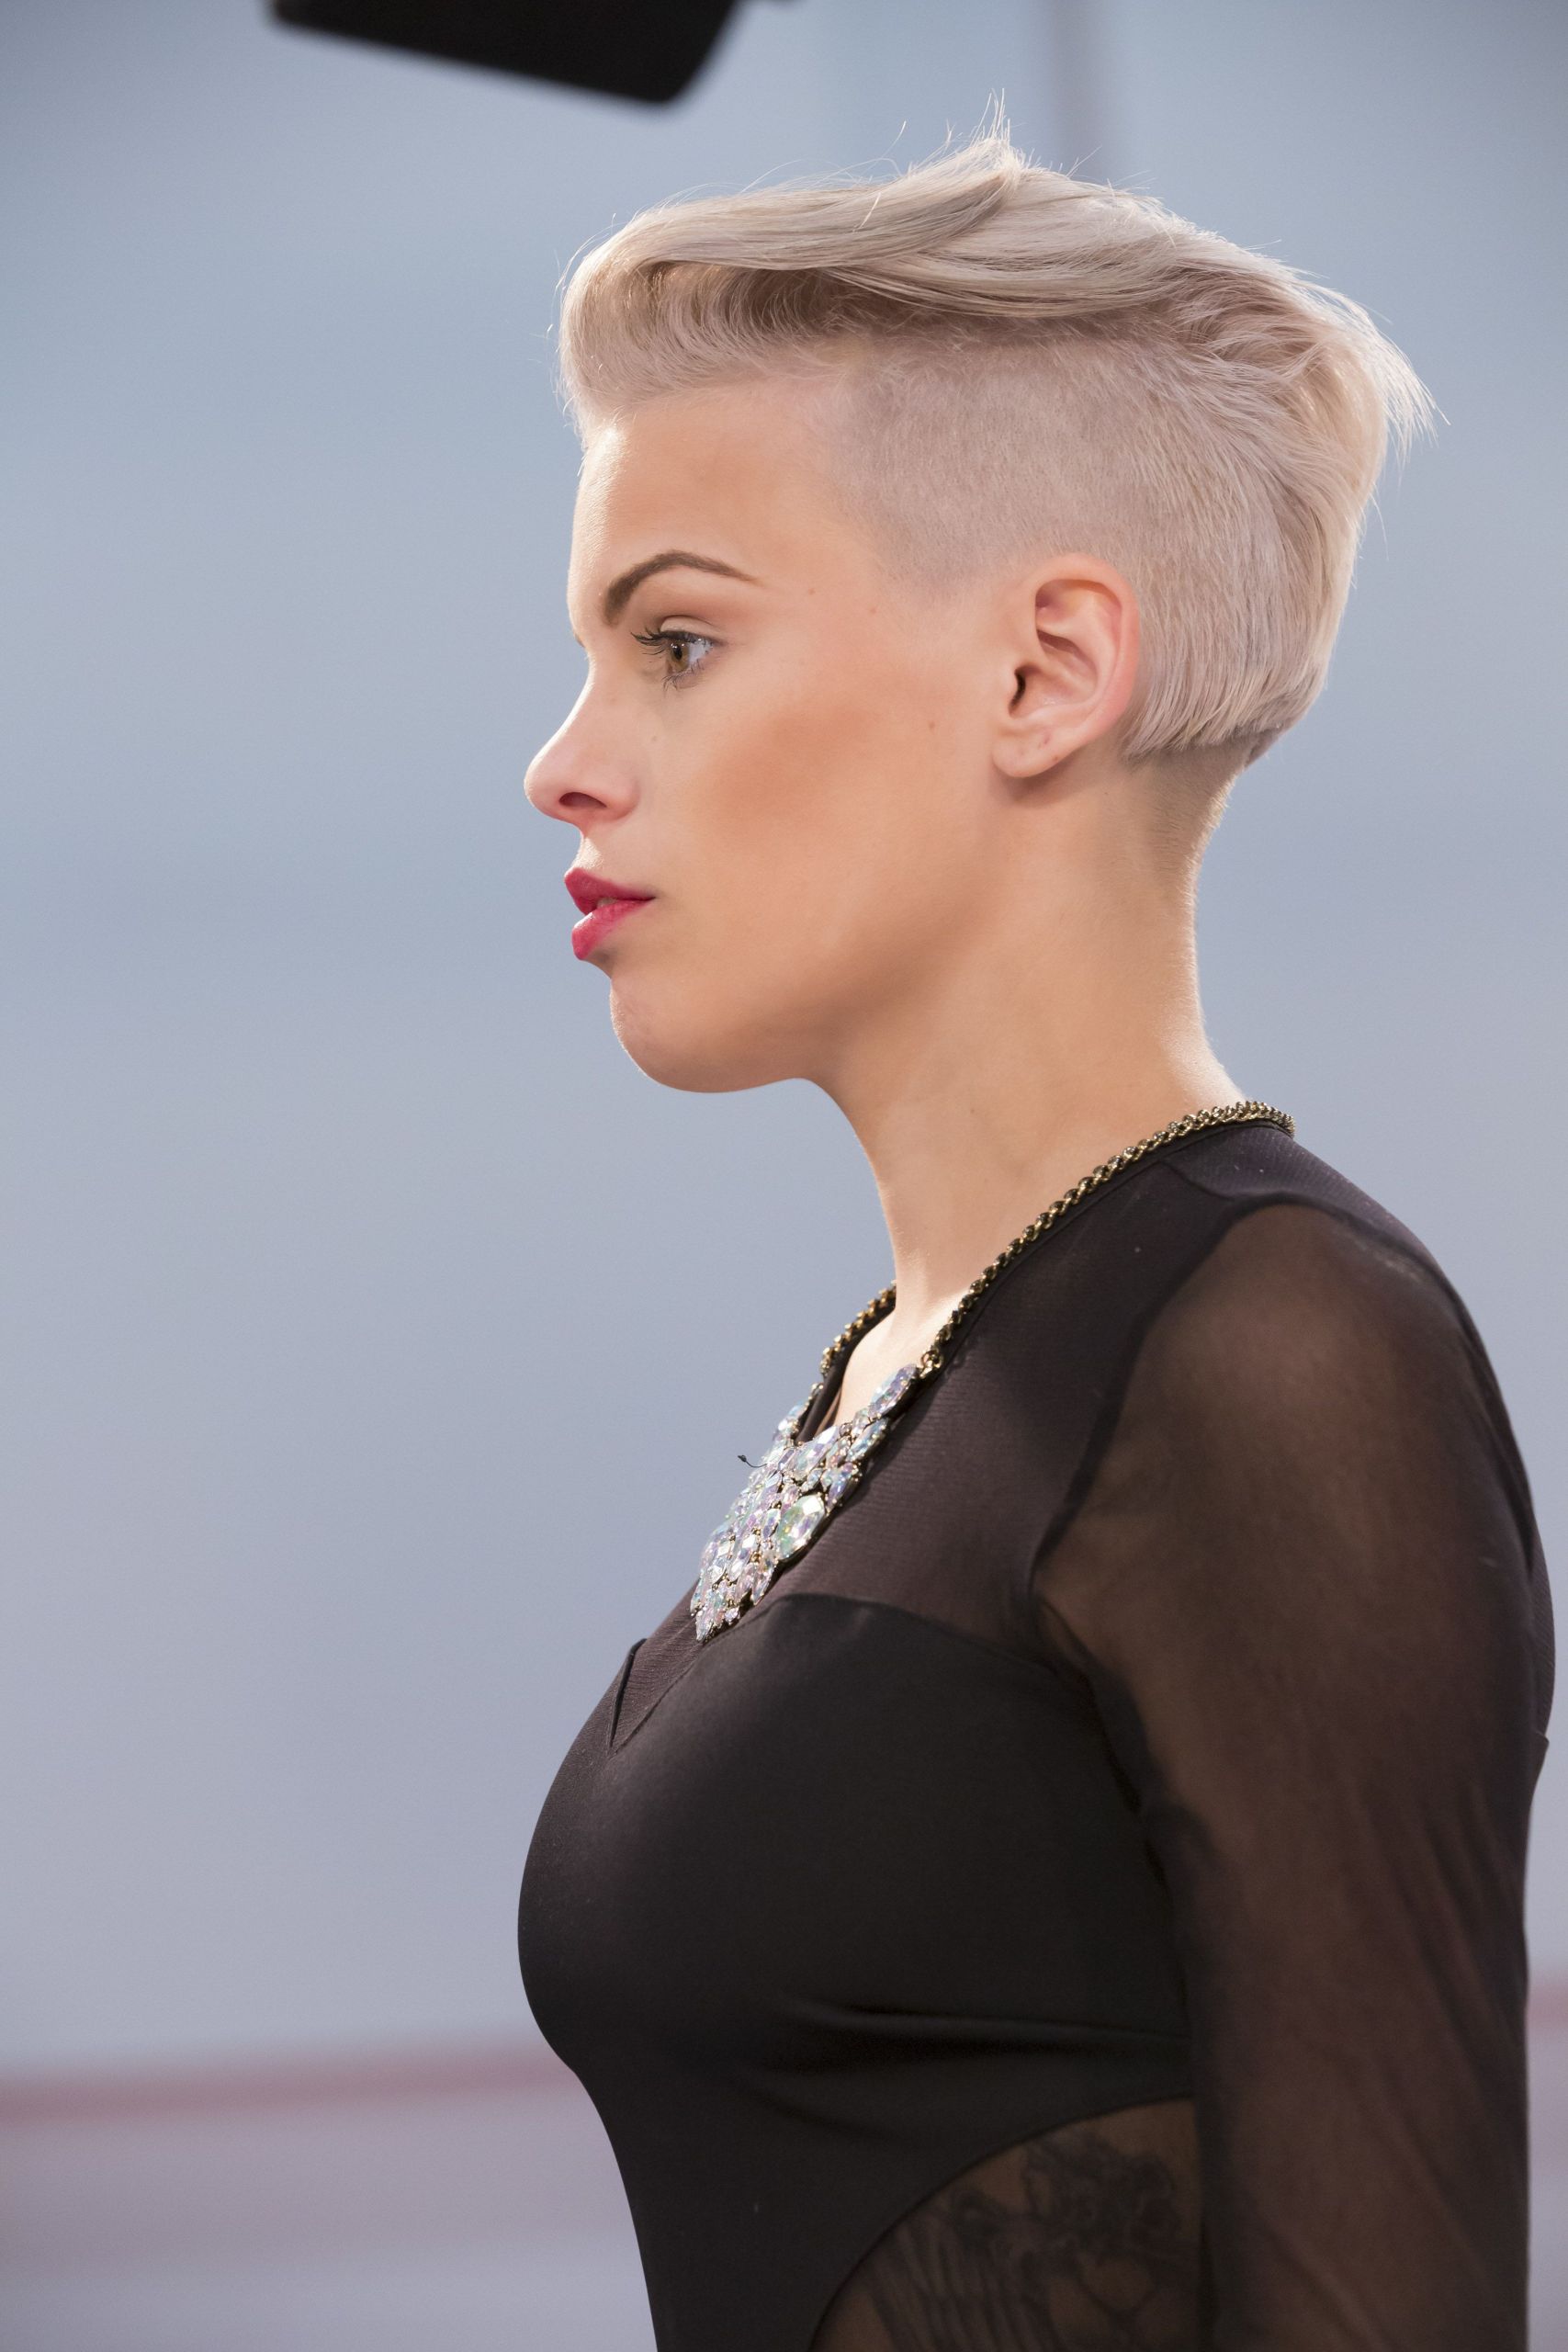 Shaved Undercut Hairstyle
 thirty Women Hairstyles for Short Hair